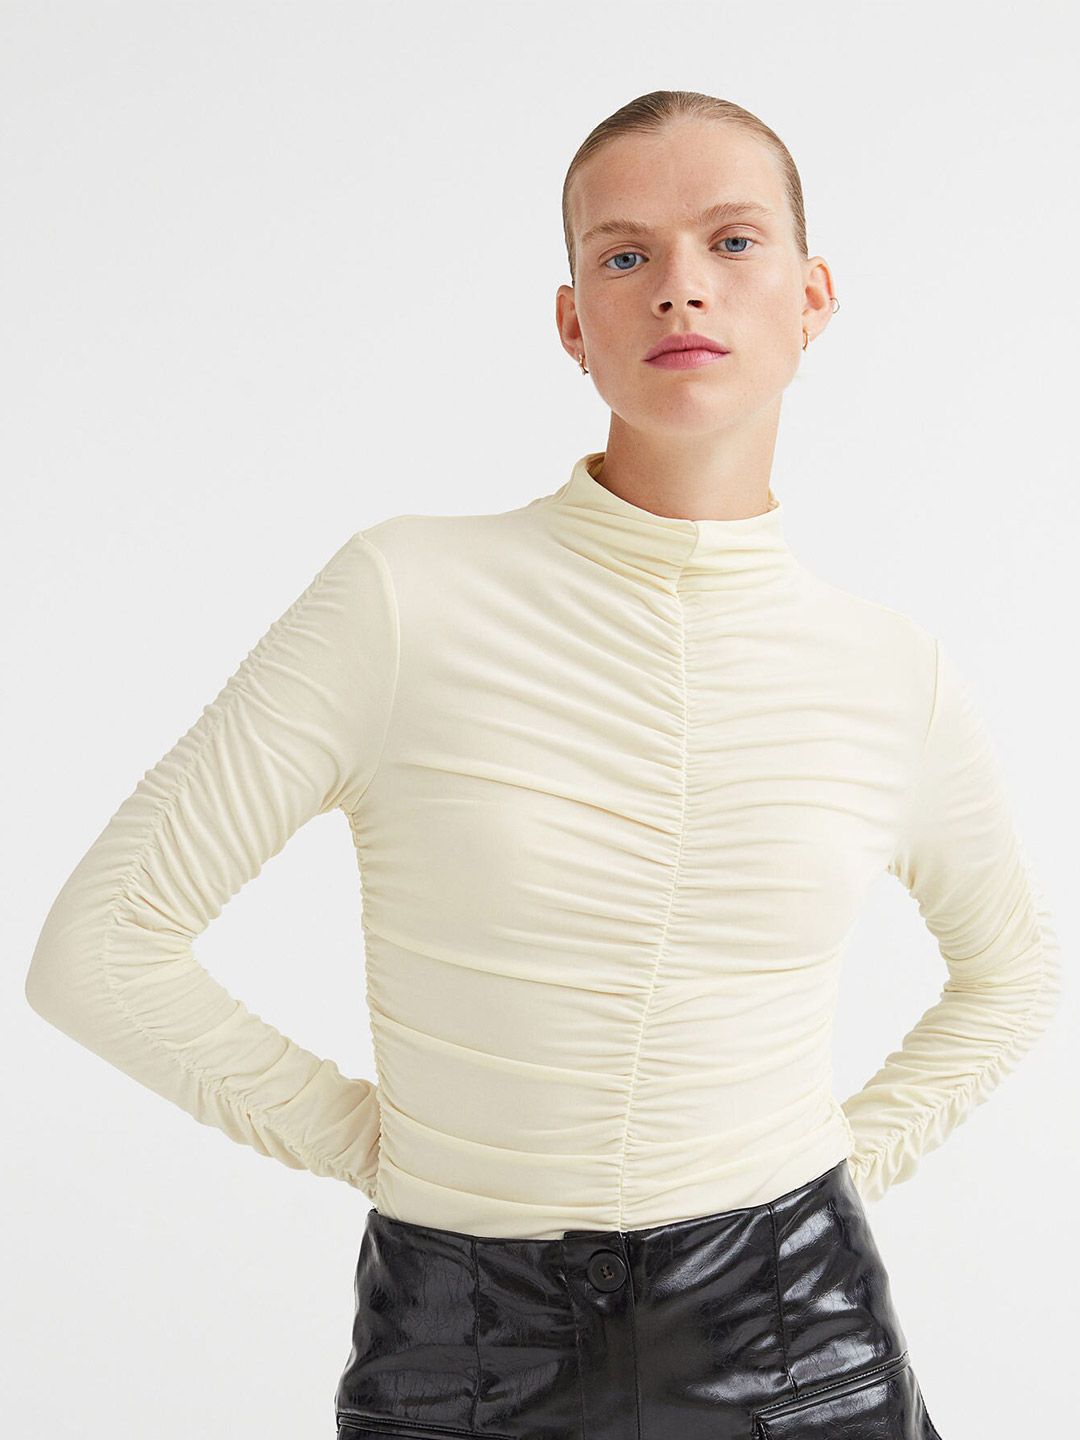 H&M Gathered Top with A Turtle Neck Price in India